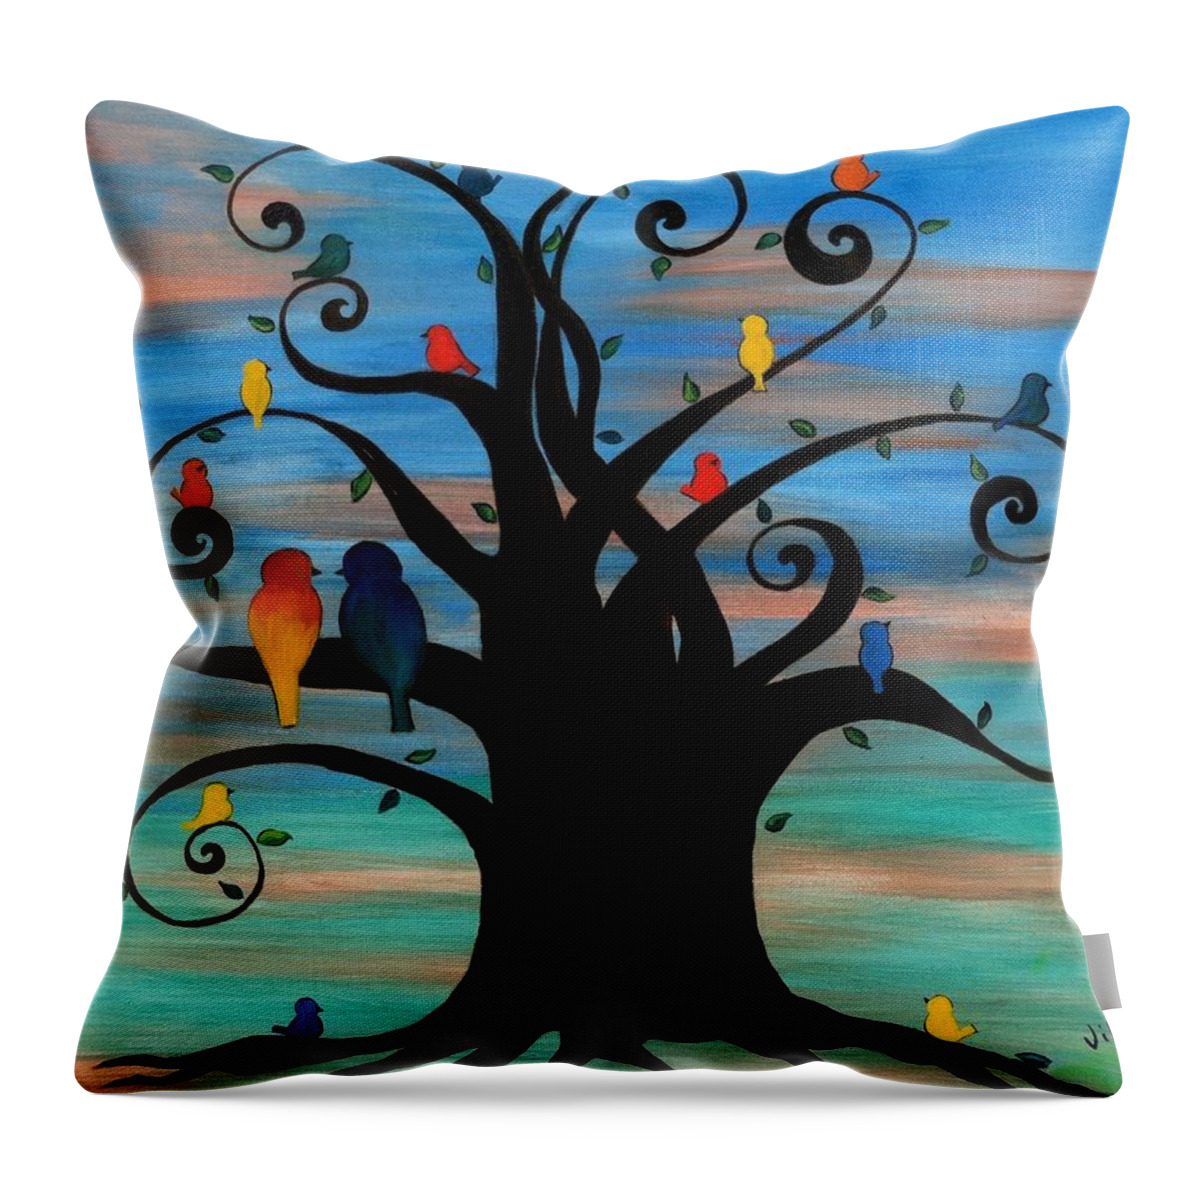 Bird Throw Pillow featuring the painting Family Tree by Vikki Angel